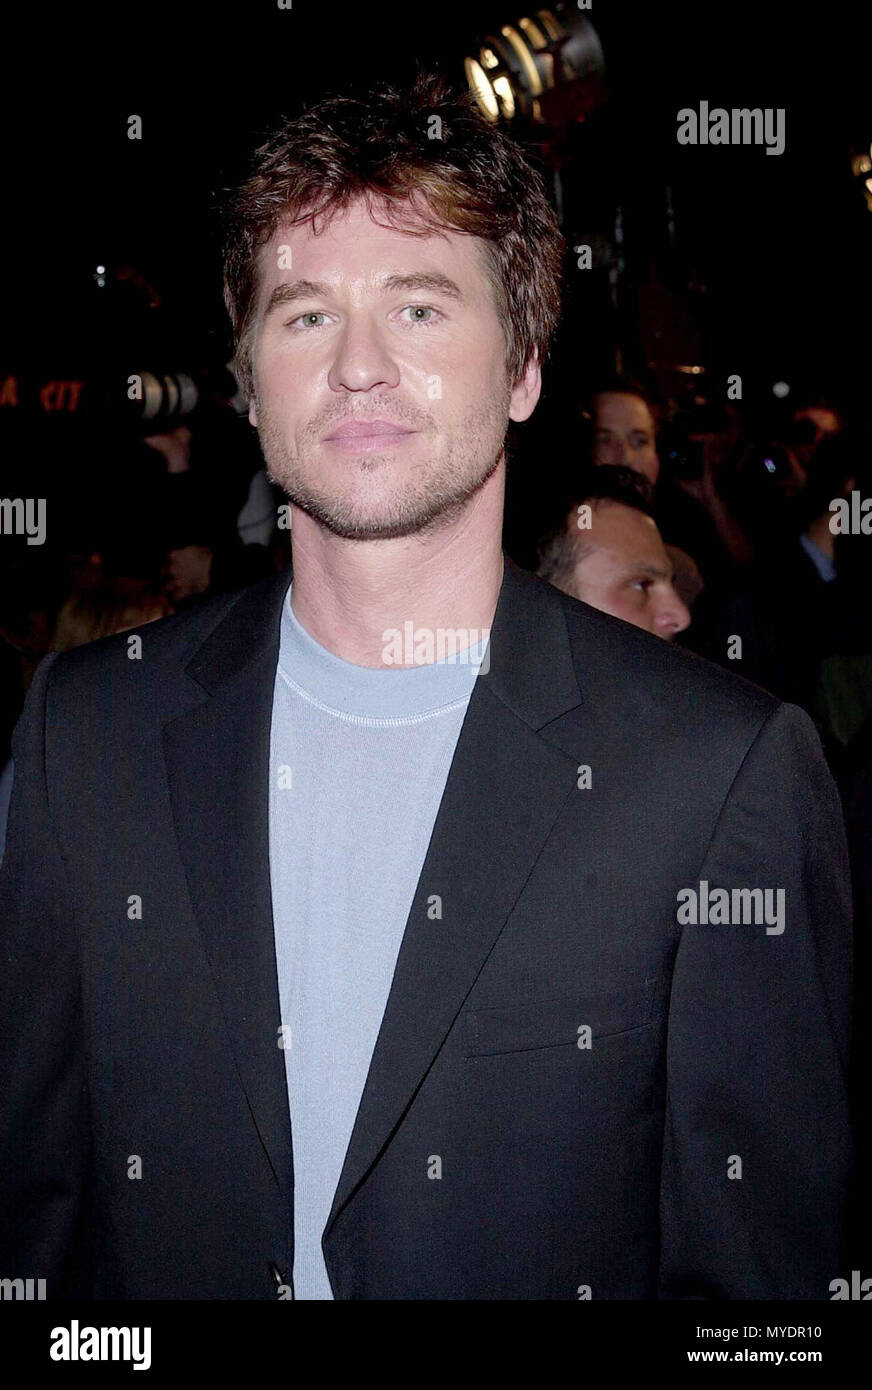 06 Nov 2000, Los Angeles, California, USA --- Original caption: Red Planet premiere was held at the Westwood Village Theatre in Los Angeles. --- Image by © . / USAVal Kilmer Appearing at Premiere 218 Red Carpet Event, Vertical, USA, Film Industry, Celebrities,  Photography, Bestof, Arts Culture and Entertainment, Topix Celebrities fashion /  Vertical, Best of, Event in Hollywood Life - California,  Red Carpet and backstage, USA, Film Industry, Celebrities,  movie celebrities, TV celebrities, Music celebrities, Photography, Bestof, Arts Culture and Entertainment,  Topix,  vertical, one person,  Stock Photo